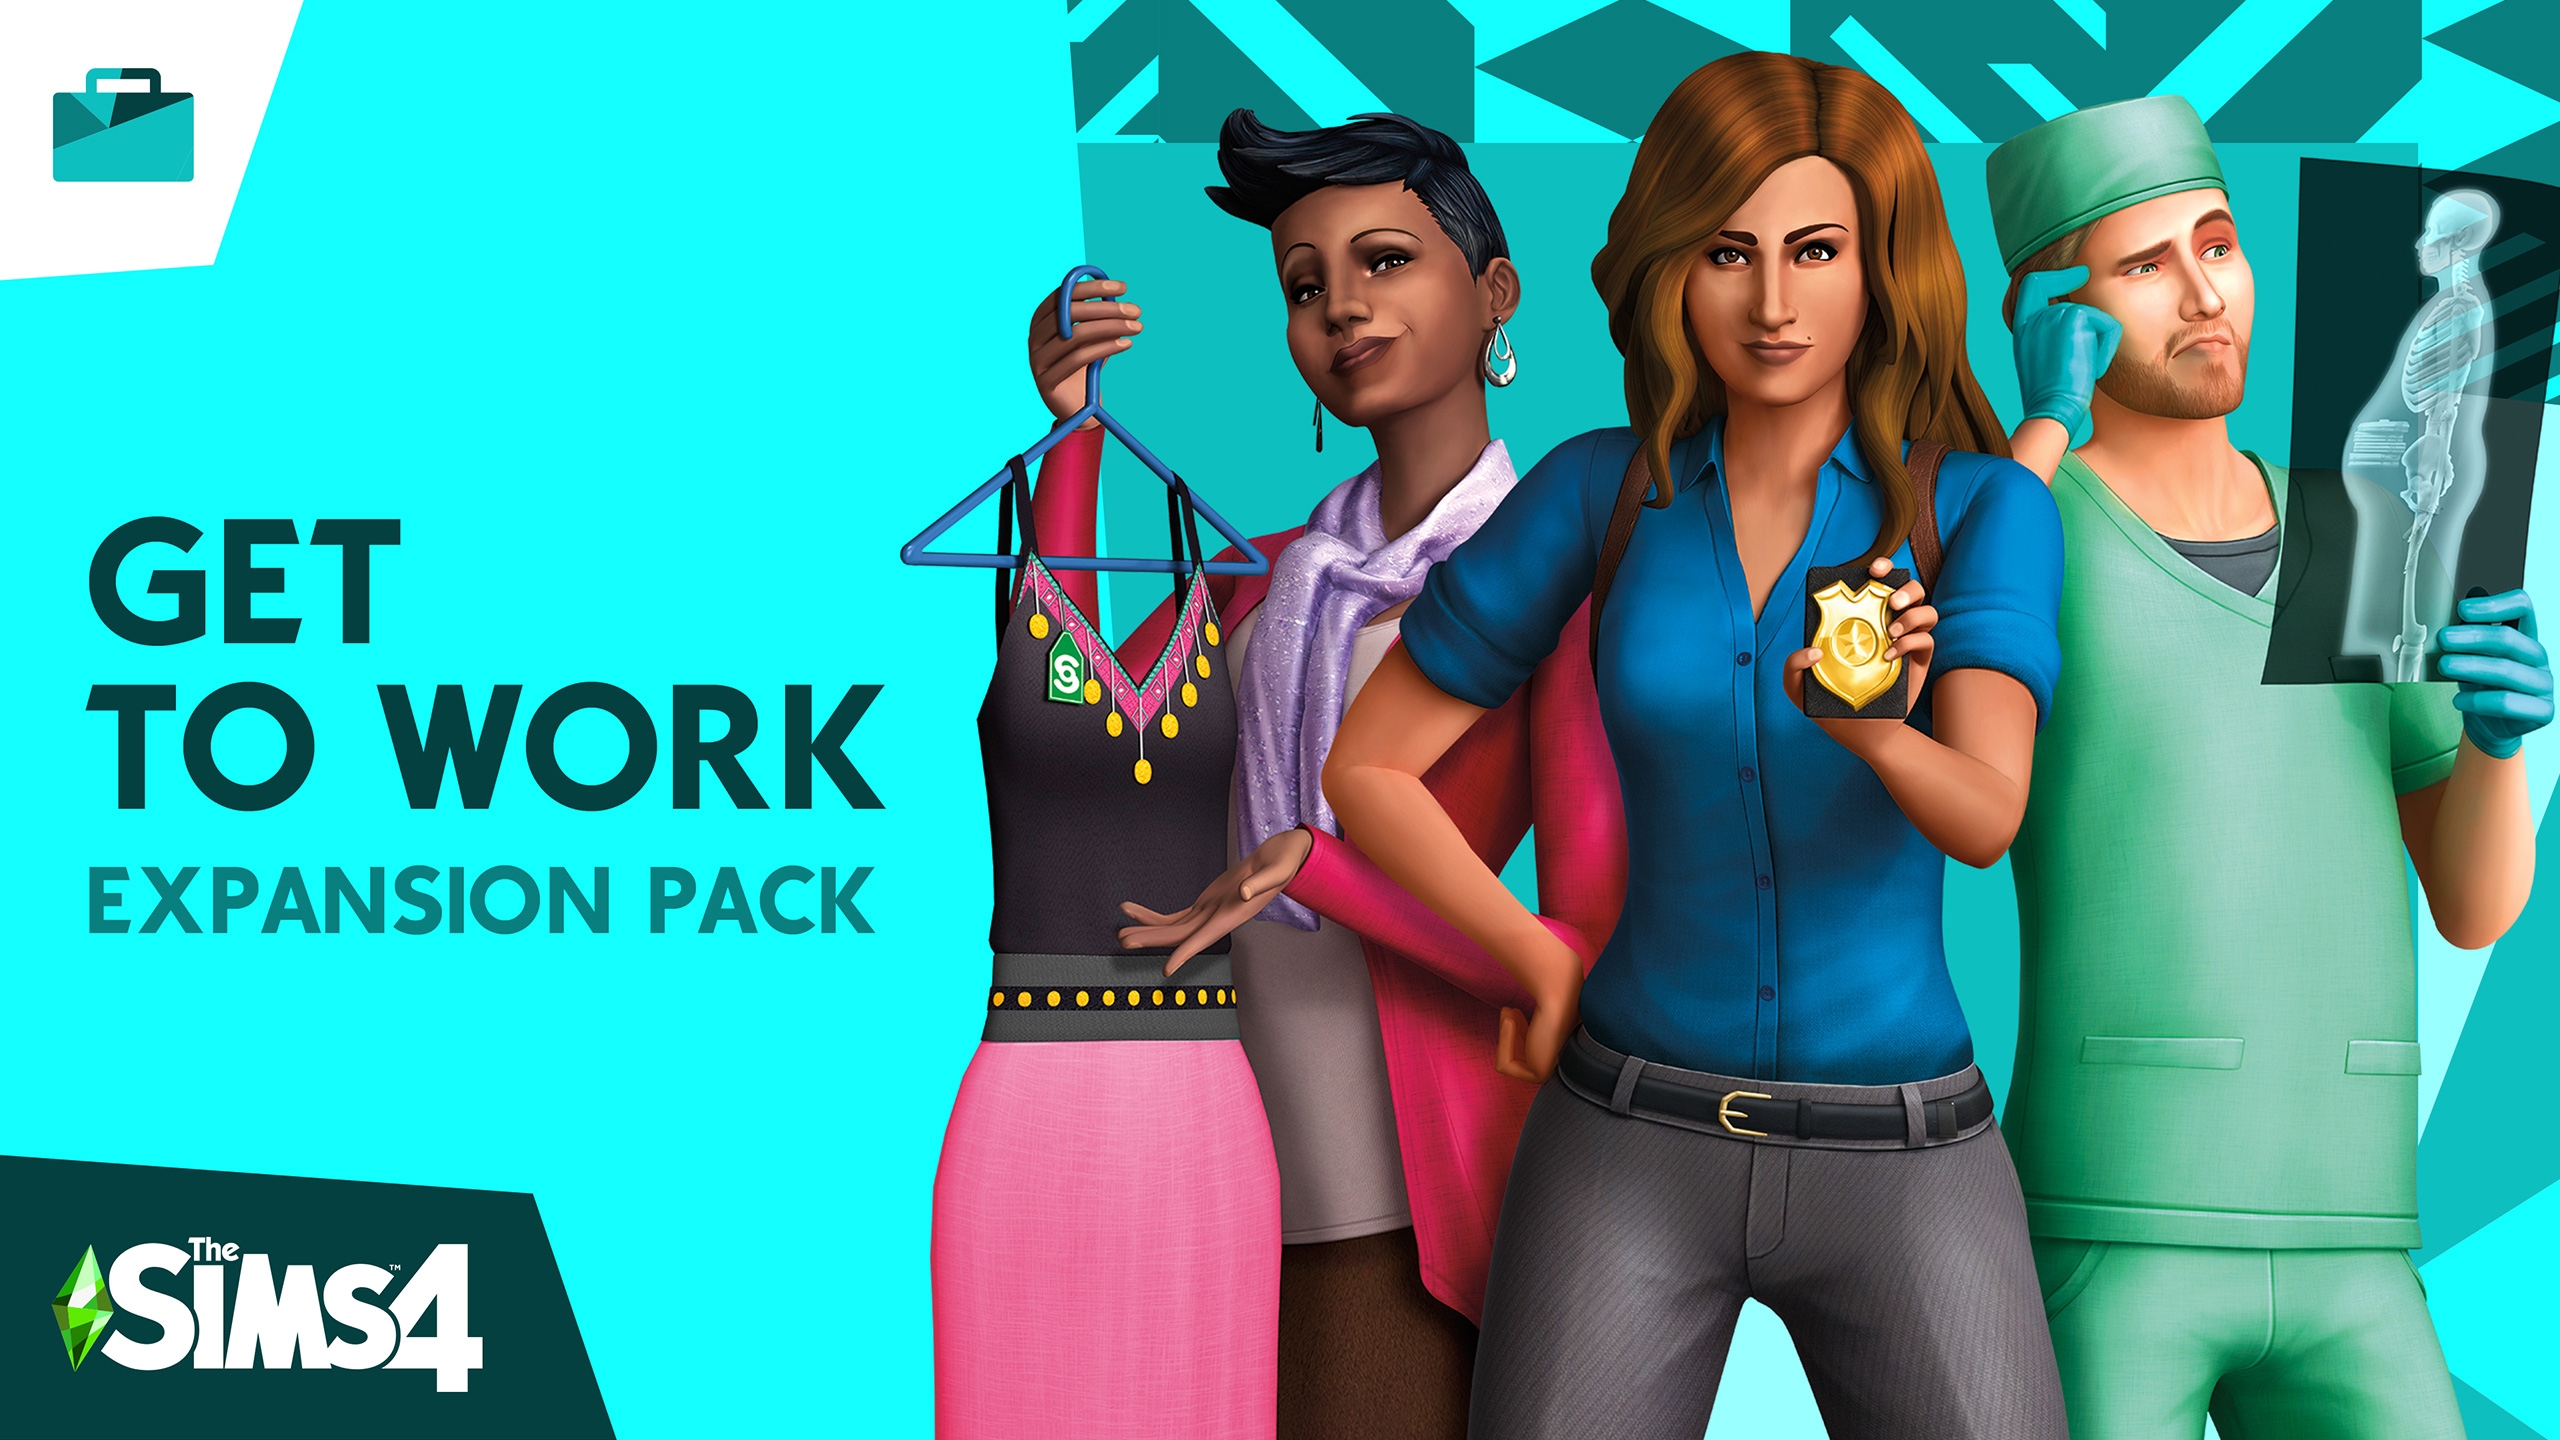 play sims 4 without origin, purchase, or download